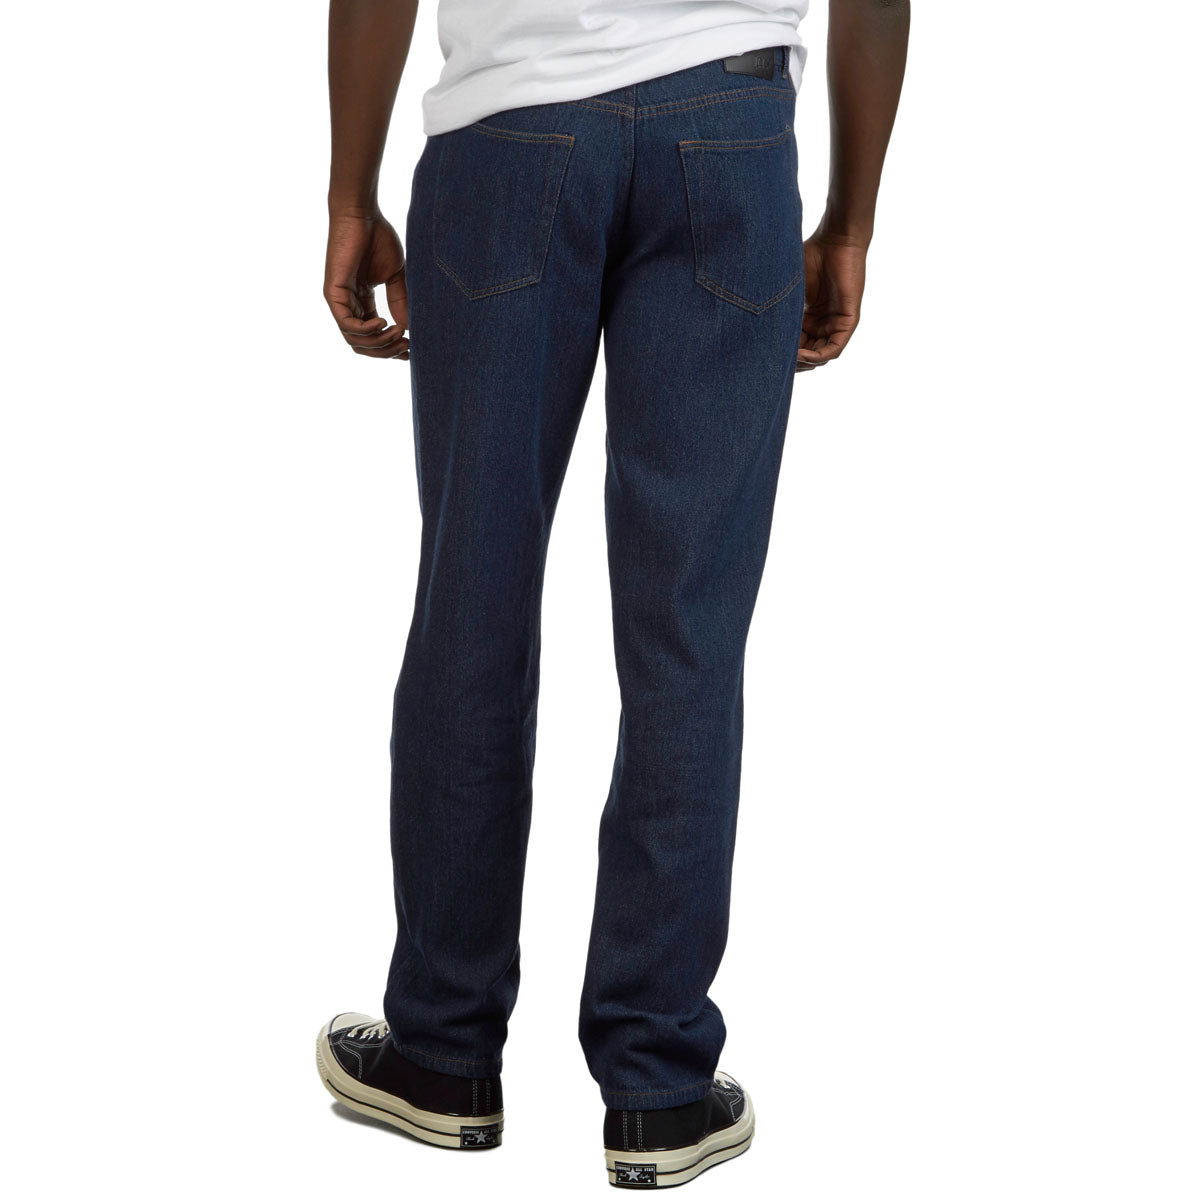 CCS Standard Plus Relaxed Denim Jeans - Raw